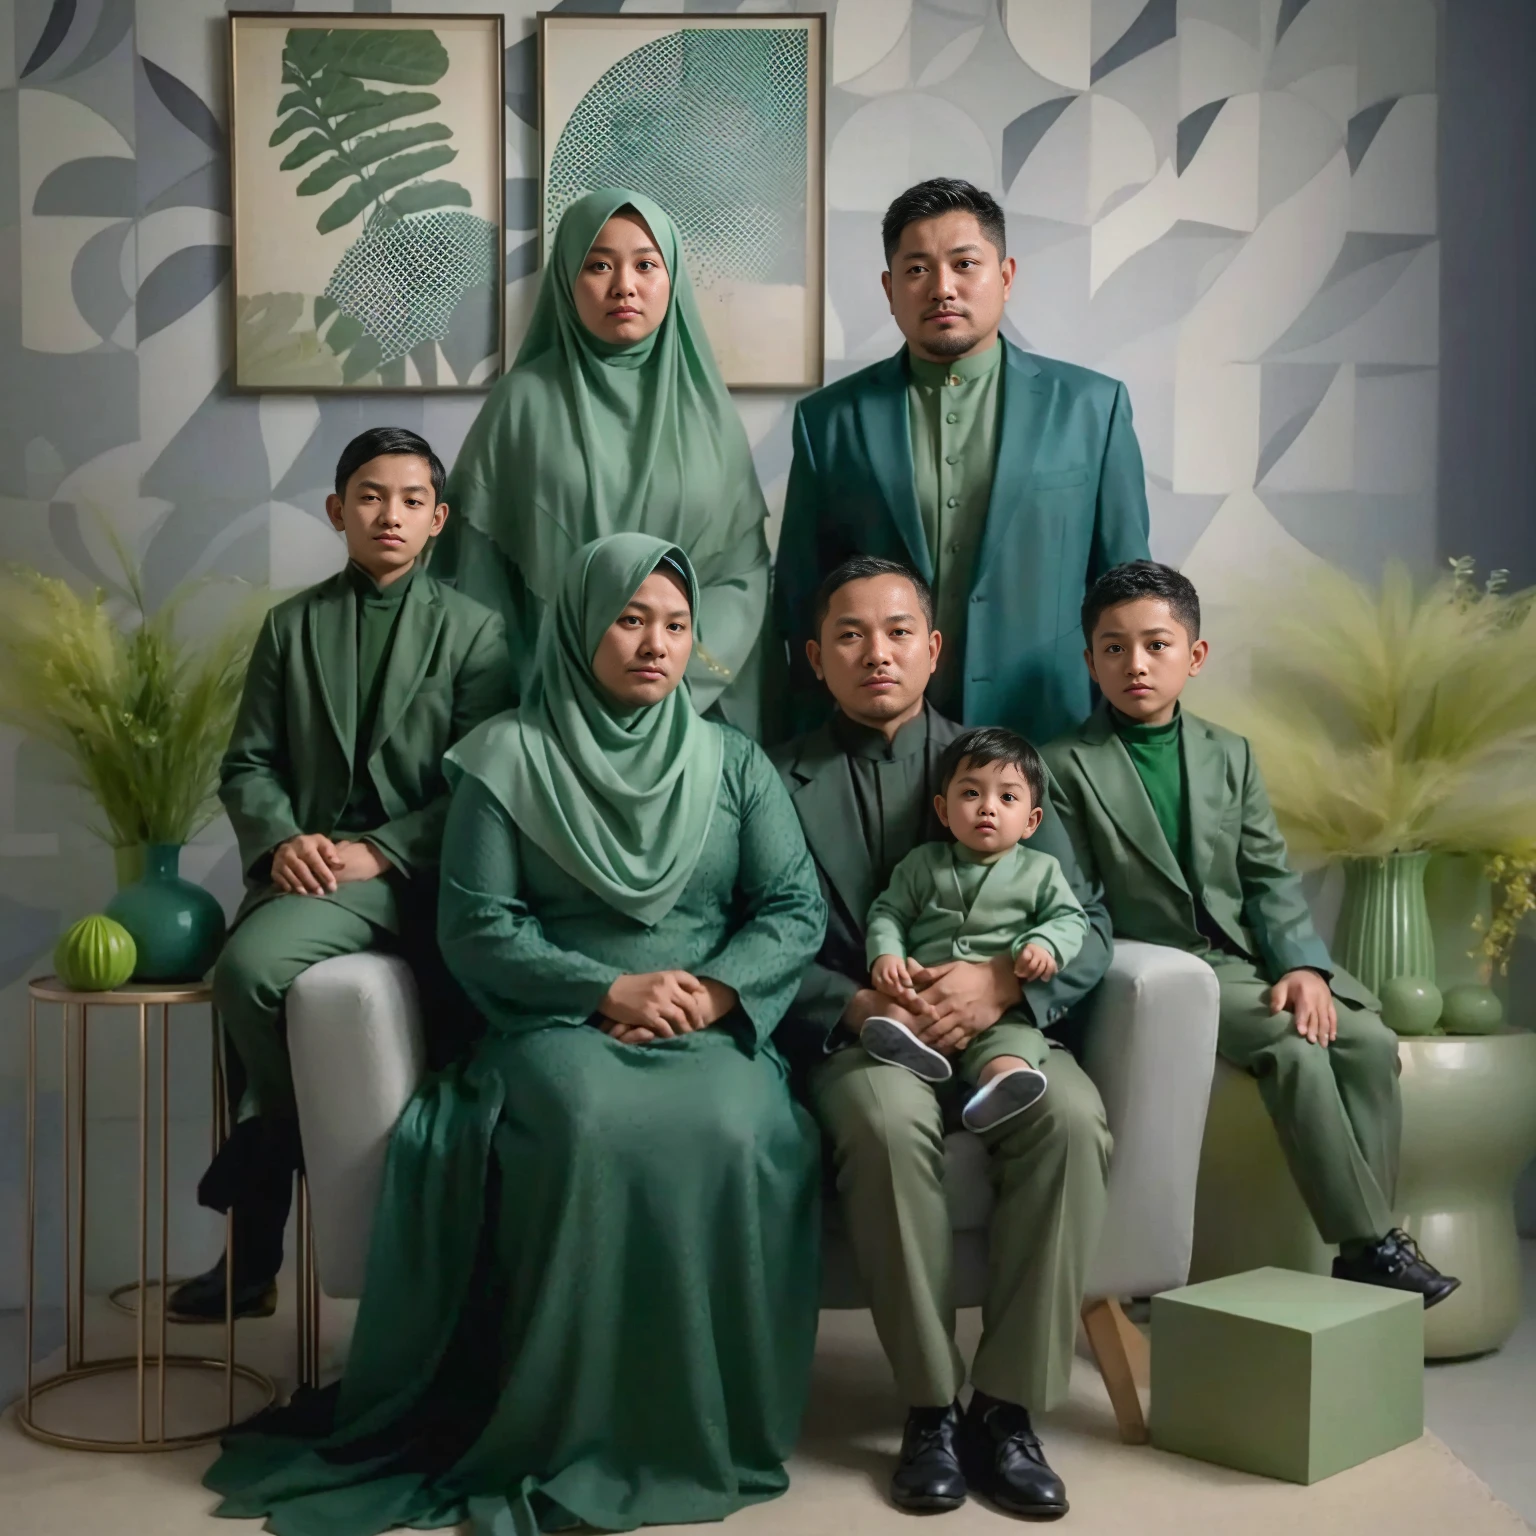 Studio Photography, close up, 6 people, an Indonesian couple aged 55 sits on a couple's chair, stand behind them there's couple aged 38, a man slightly overweight short buzz hair and a woman wearing long compliant pashmina hijab holding on a baby boy aged 2, accompanied by two boys aged 10, all wearing green emerald suits for man and gamis sharia for woman, sets at studio with modern abstract patterned walls, green flower vases, side tables, fresh color, 8k, photography, UHD.